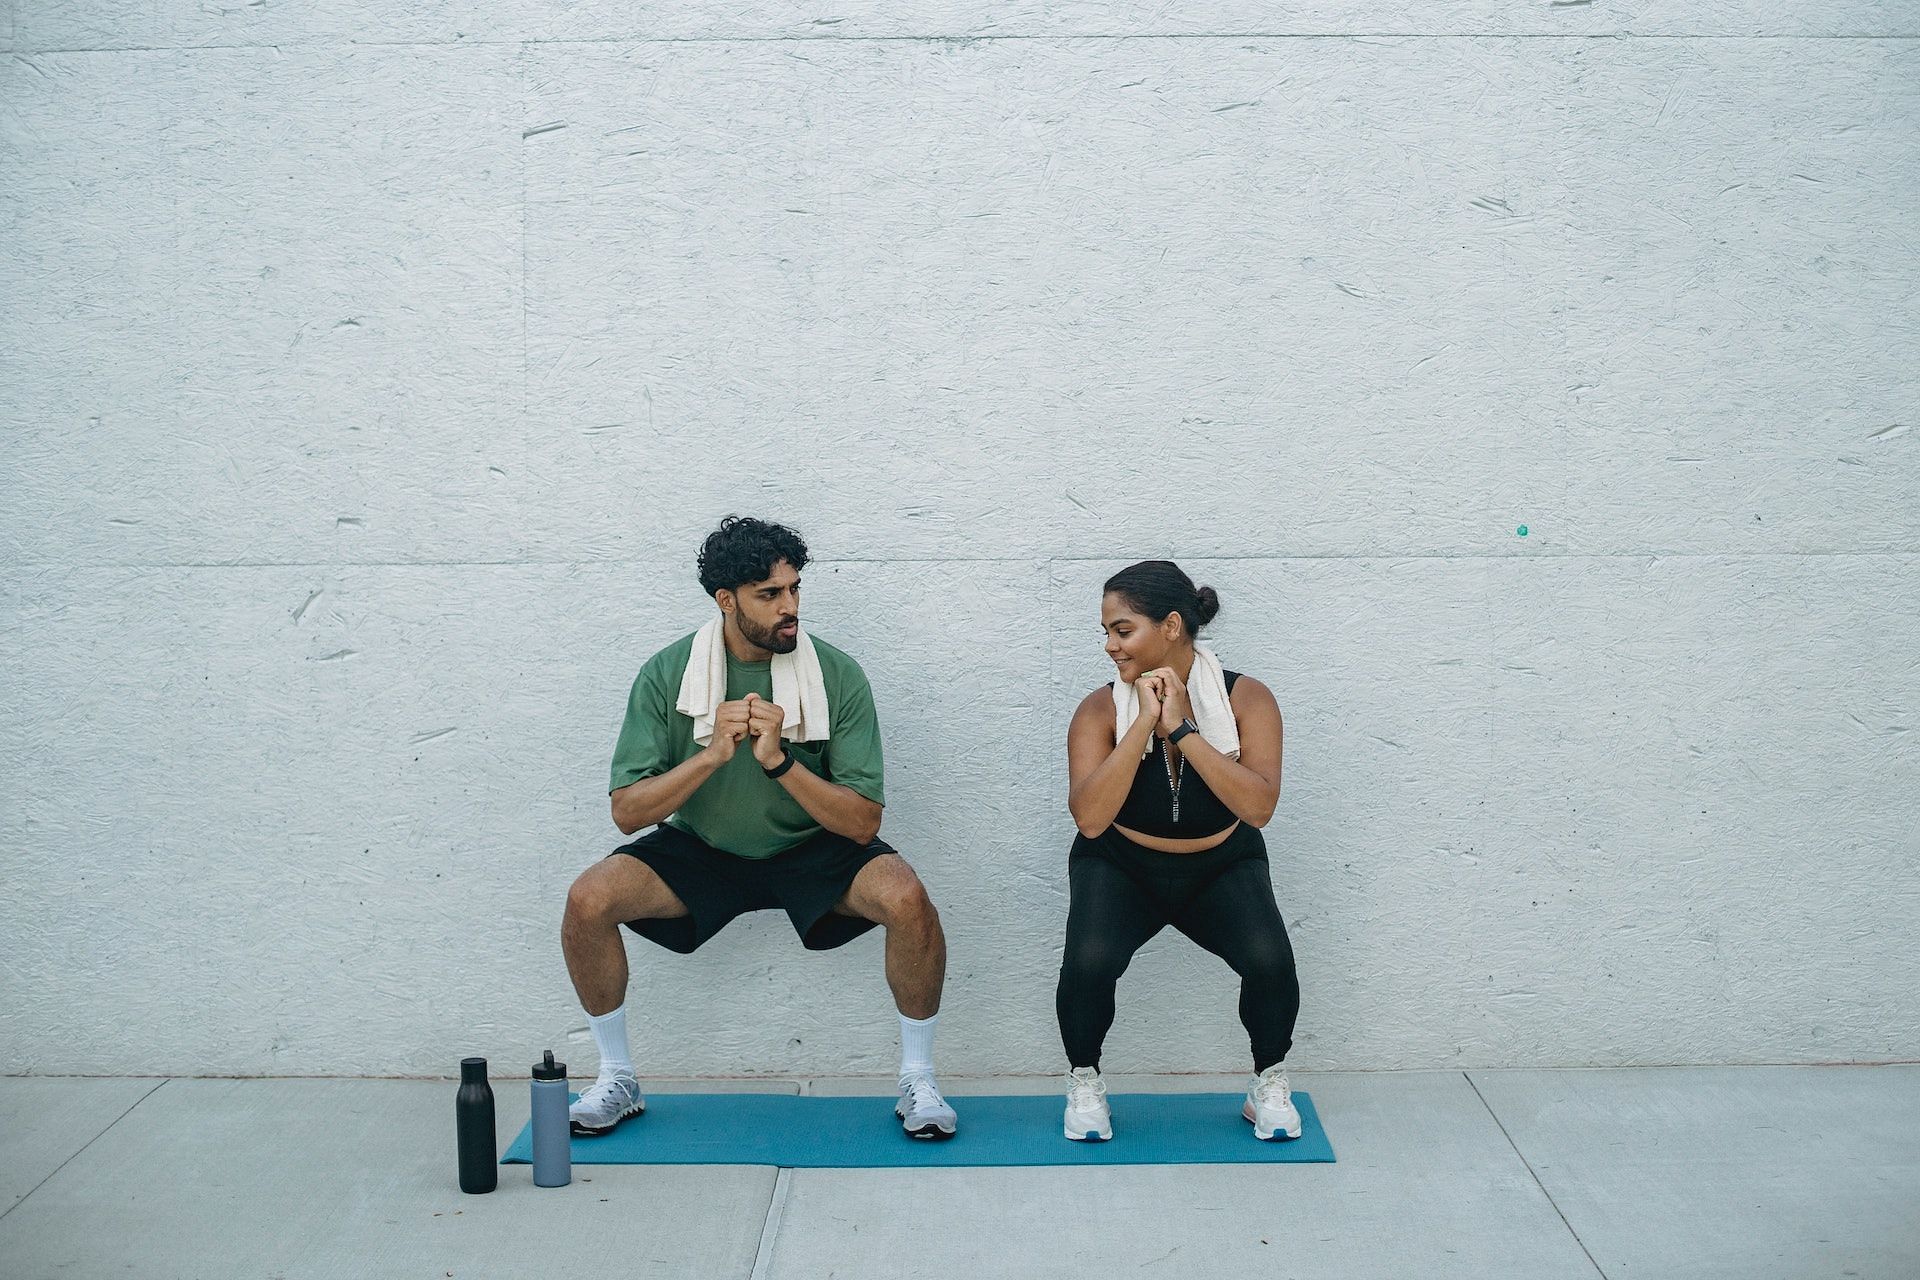 Glute exercises are important for glutes strengthening. (Photo via Pexels/Photo by Ketut Subiyanto)